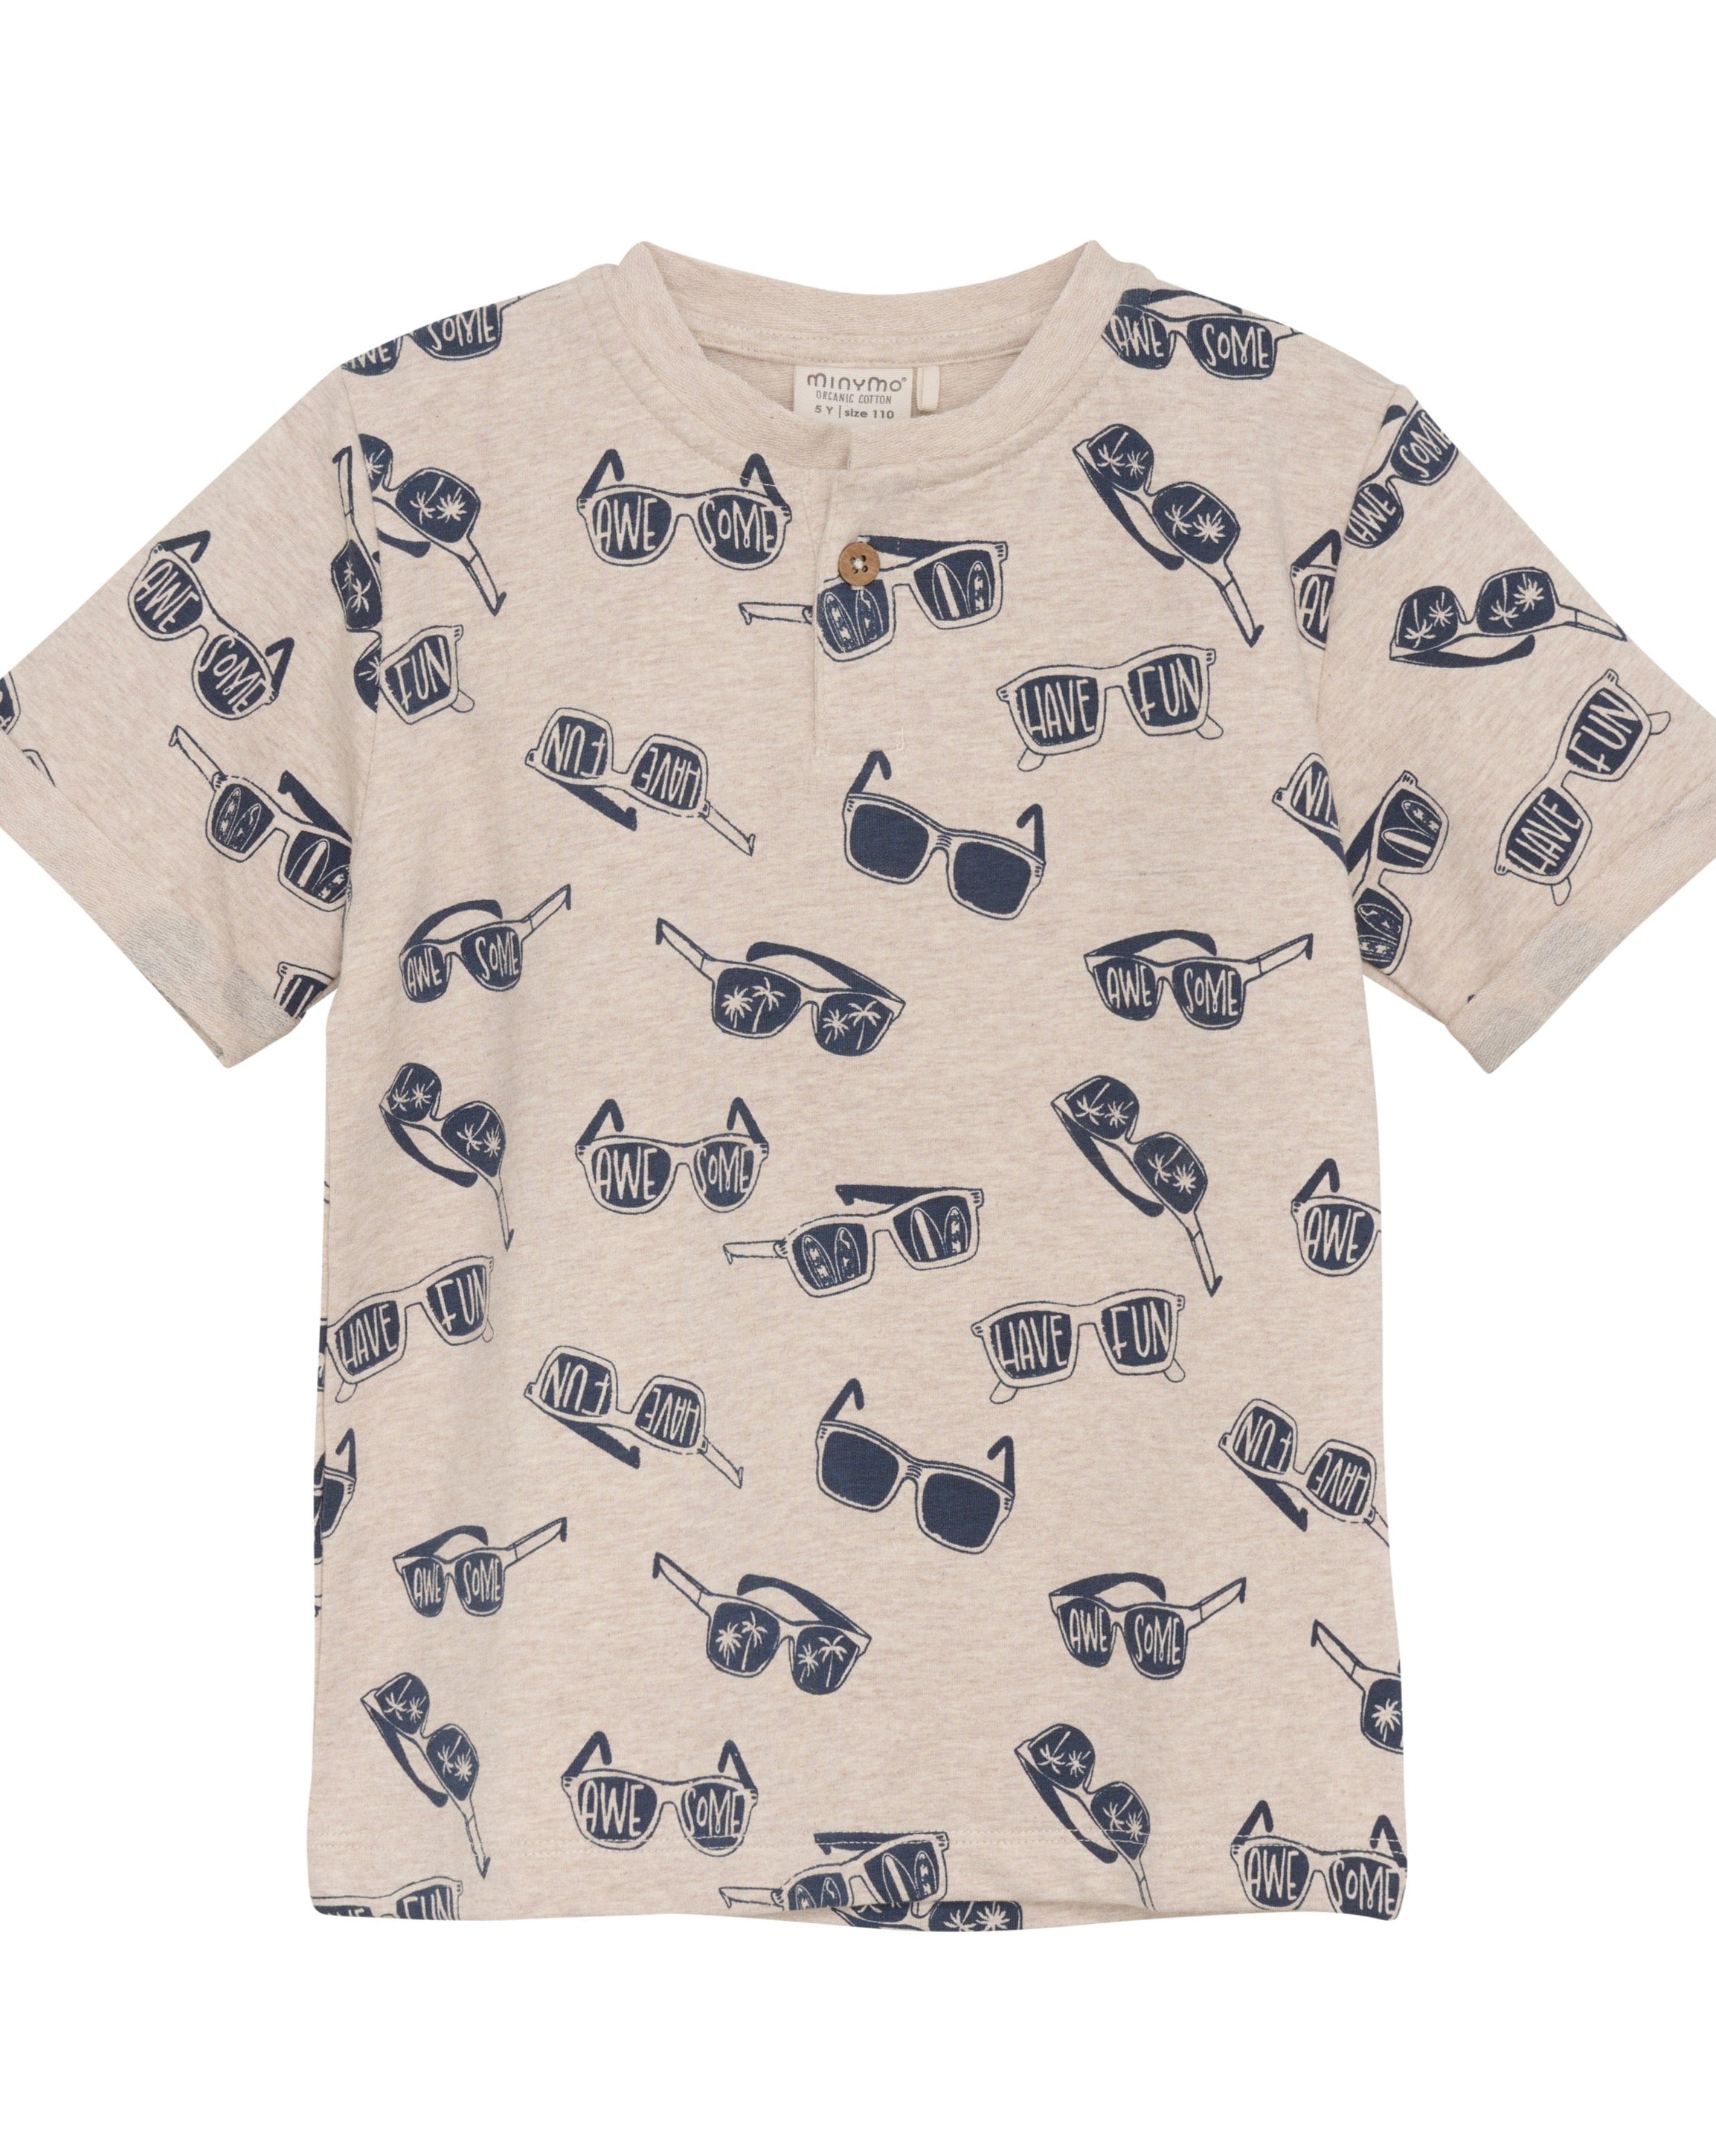 Sunglasses Print T-Shirt and Shorts in Pristine and Navy Set